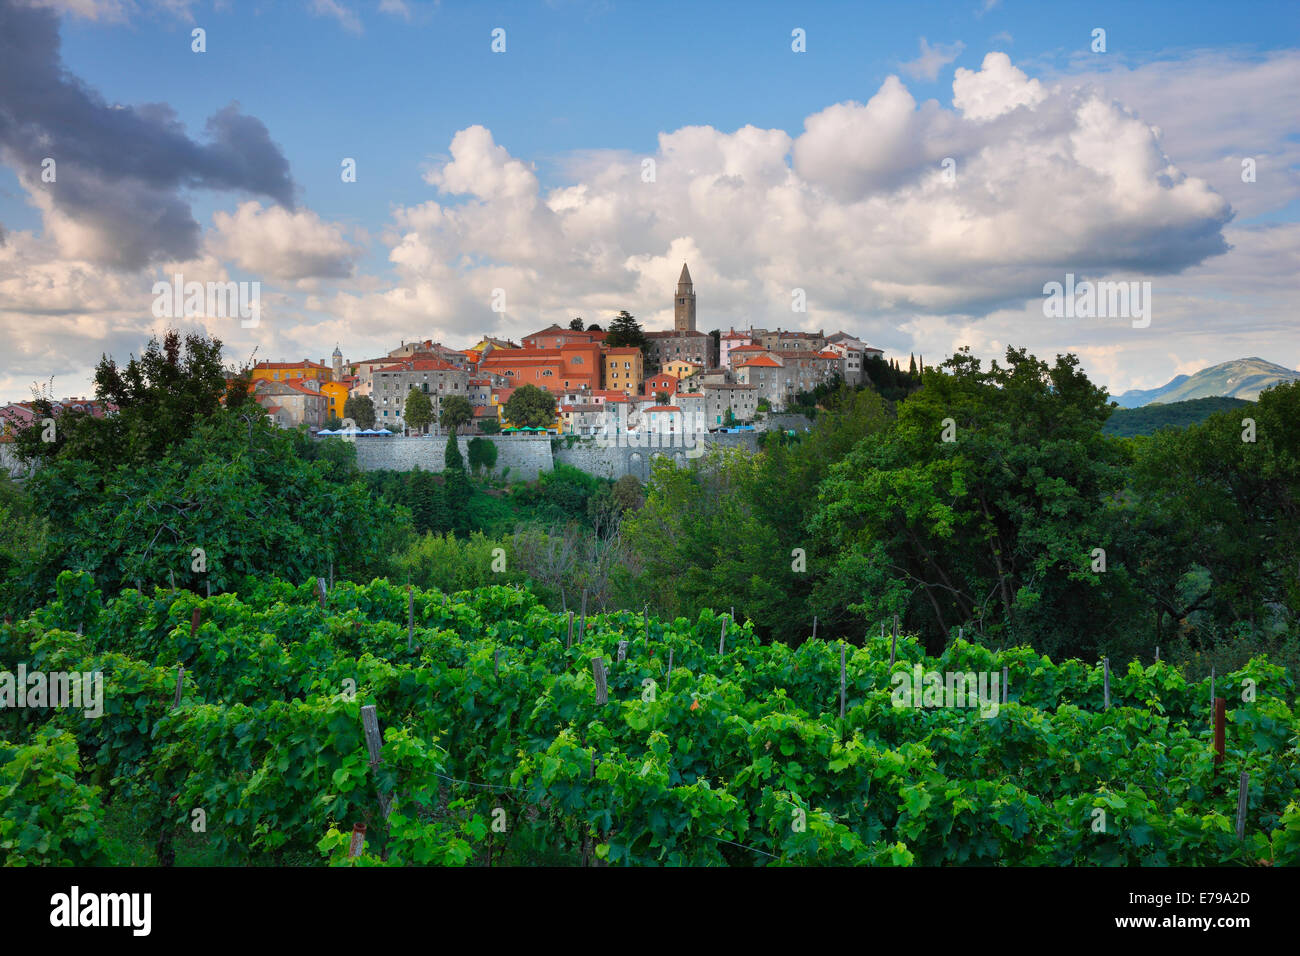 Labin old town on the hill in Istra, Croatia Stock Photo